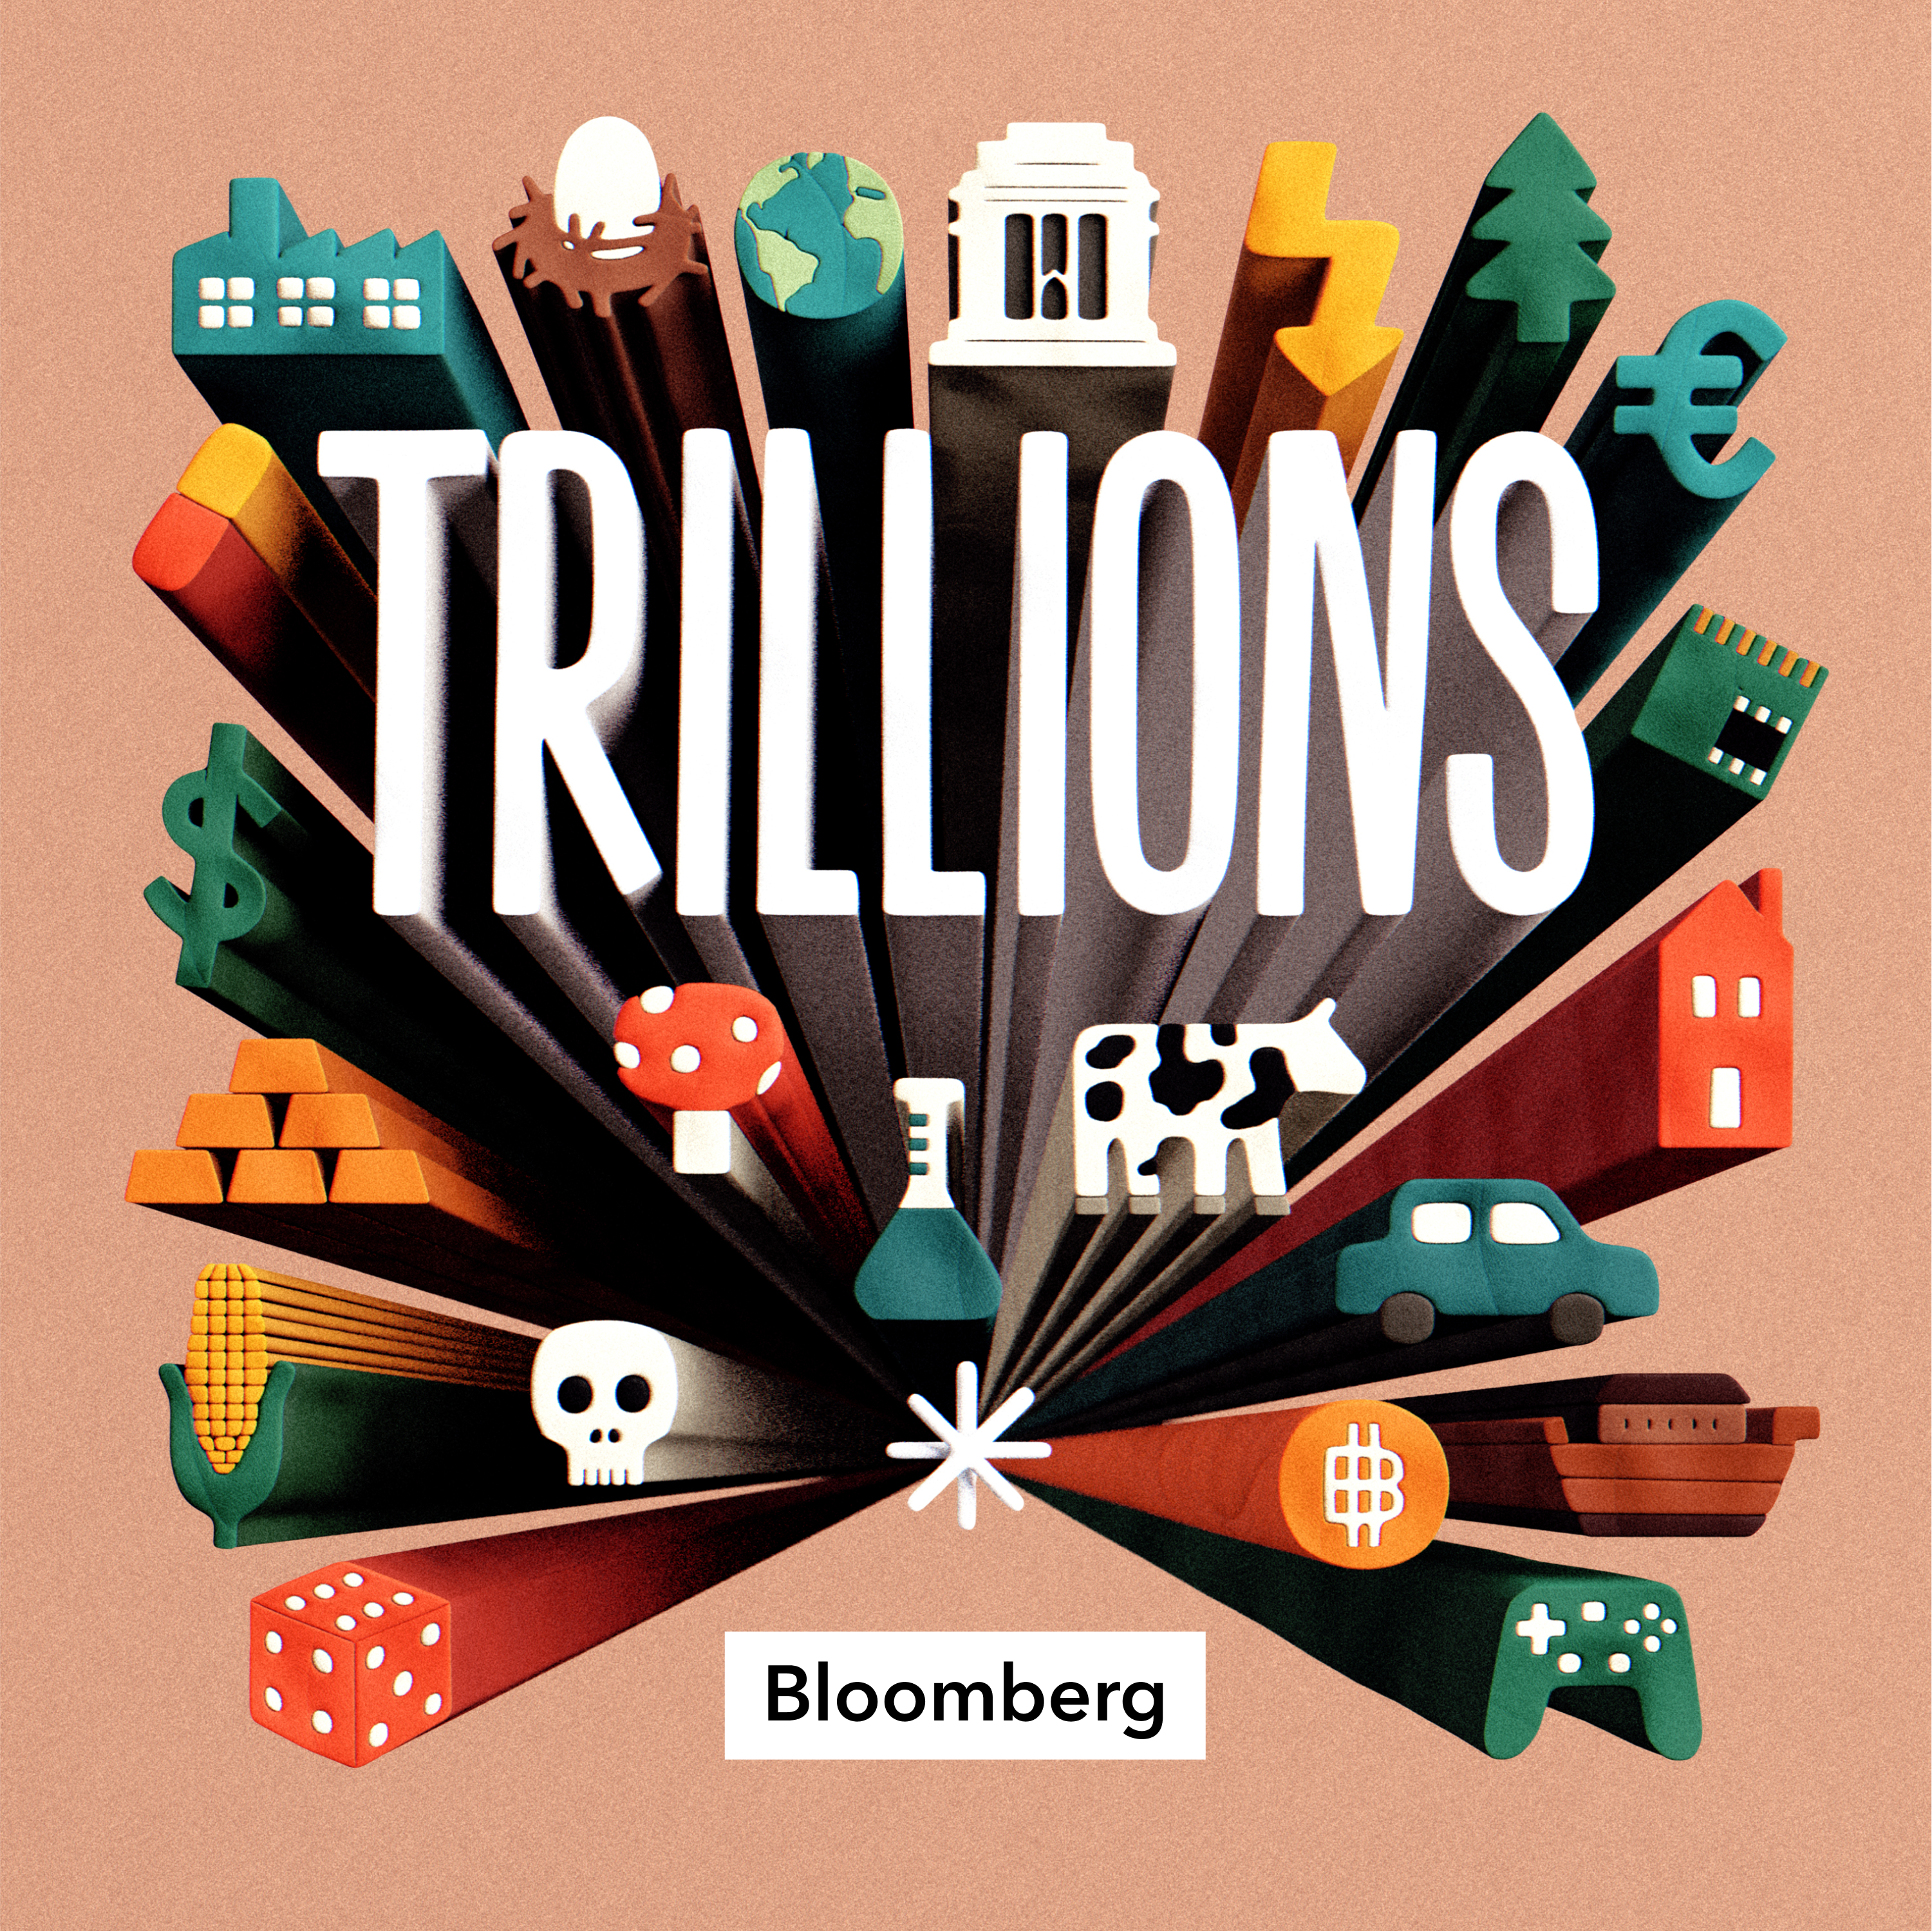 Welcome to Trillions